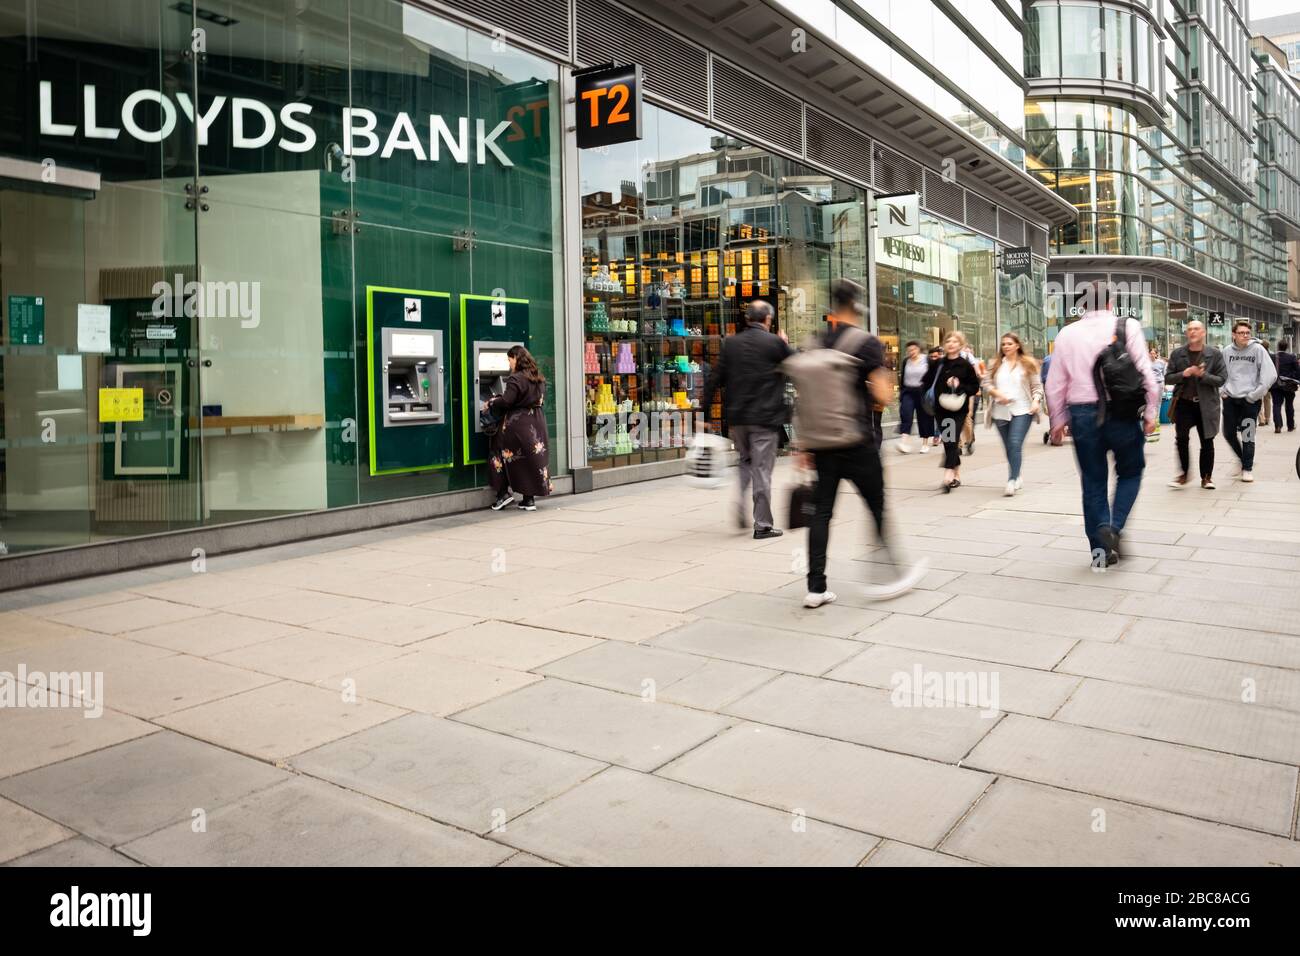 Lloyds high street retail bank and busy street of people- London Stock Photo